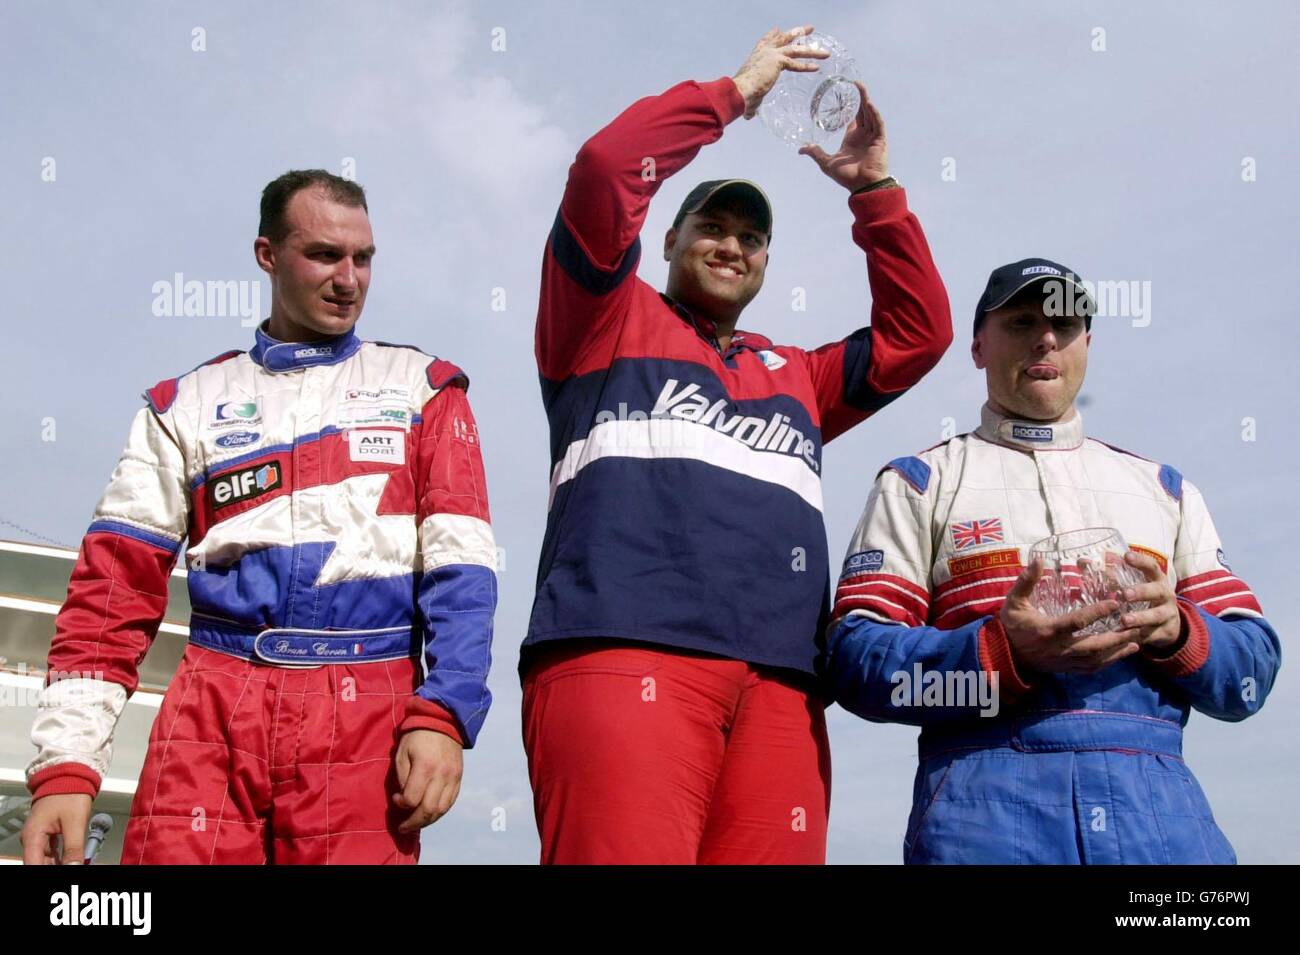 Christian Odd Sanne of Norway (centre) who won the British Powerboat Grand Prix in London's Docklands with Bruno Corsin of France (left) who came second and Britain's Owen Jelf who came third. Stock Photo